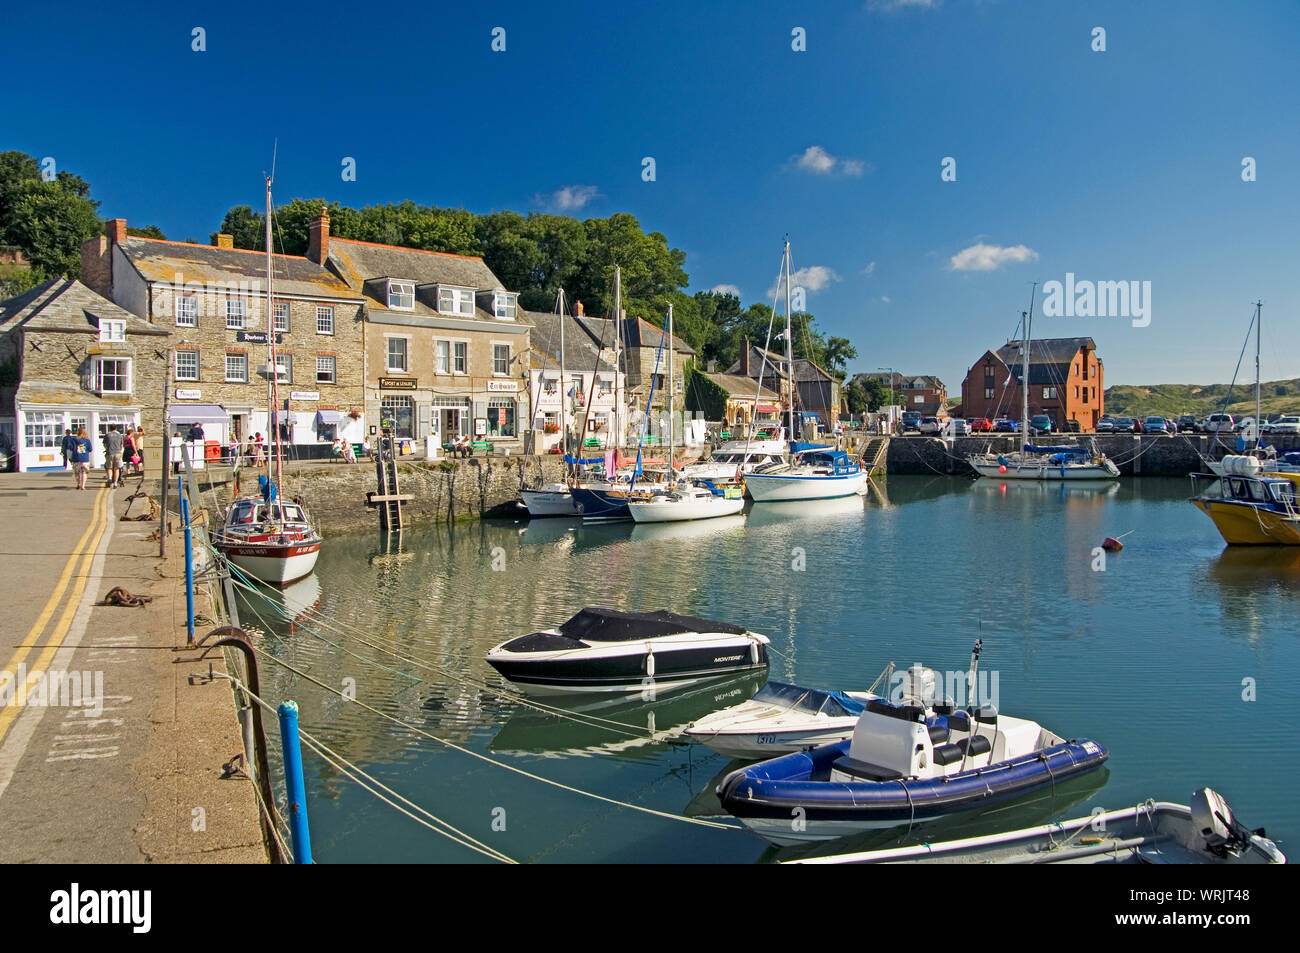 The beautiful harbour at Padstow, Cornwall, England where fishing boats lie beside luxury sailing yachts Stock Photo